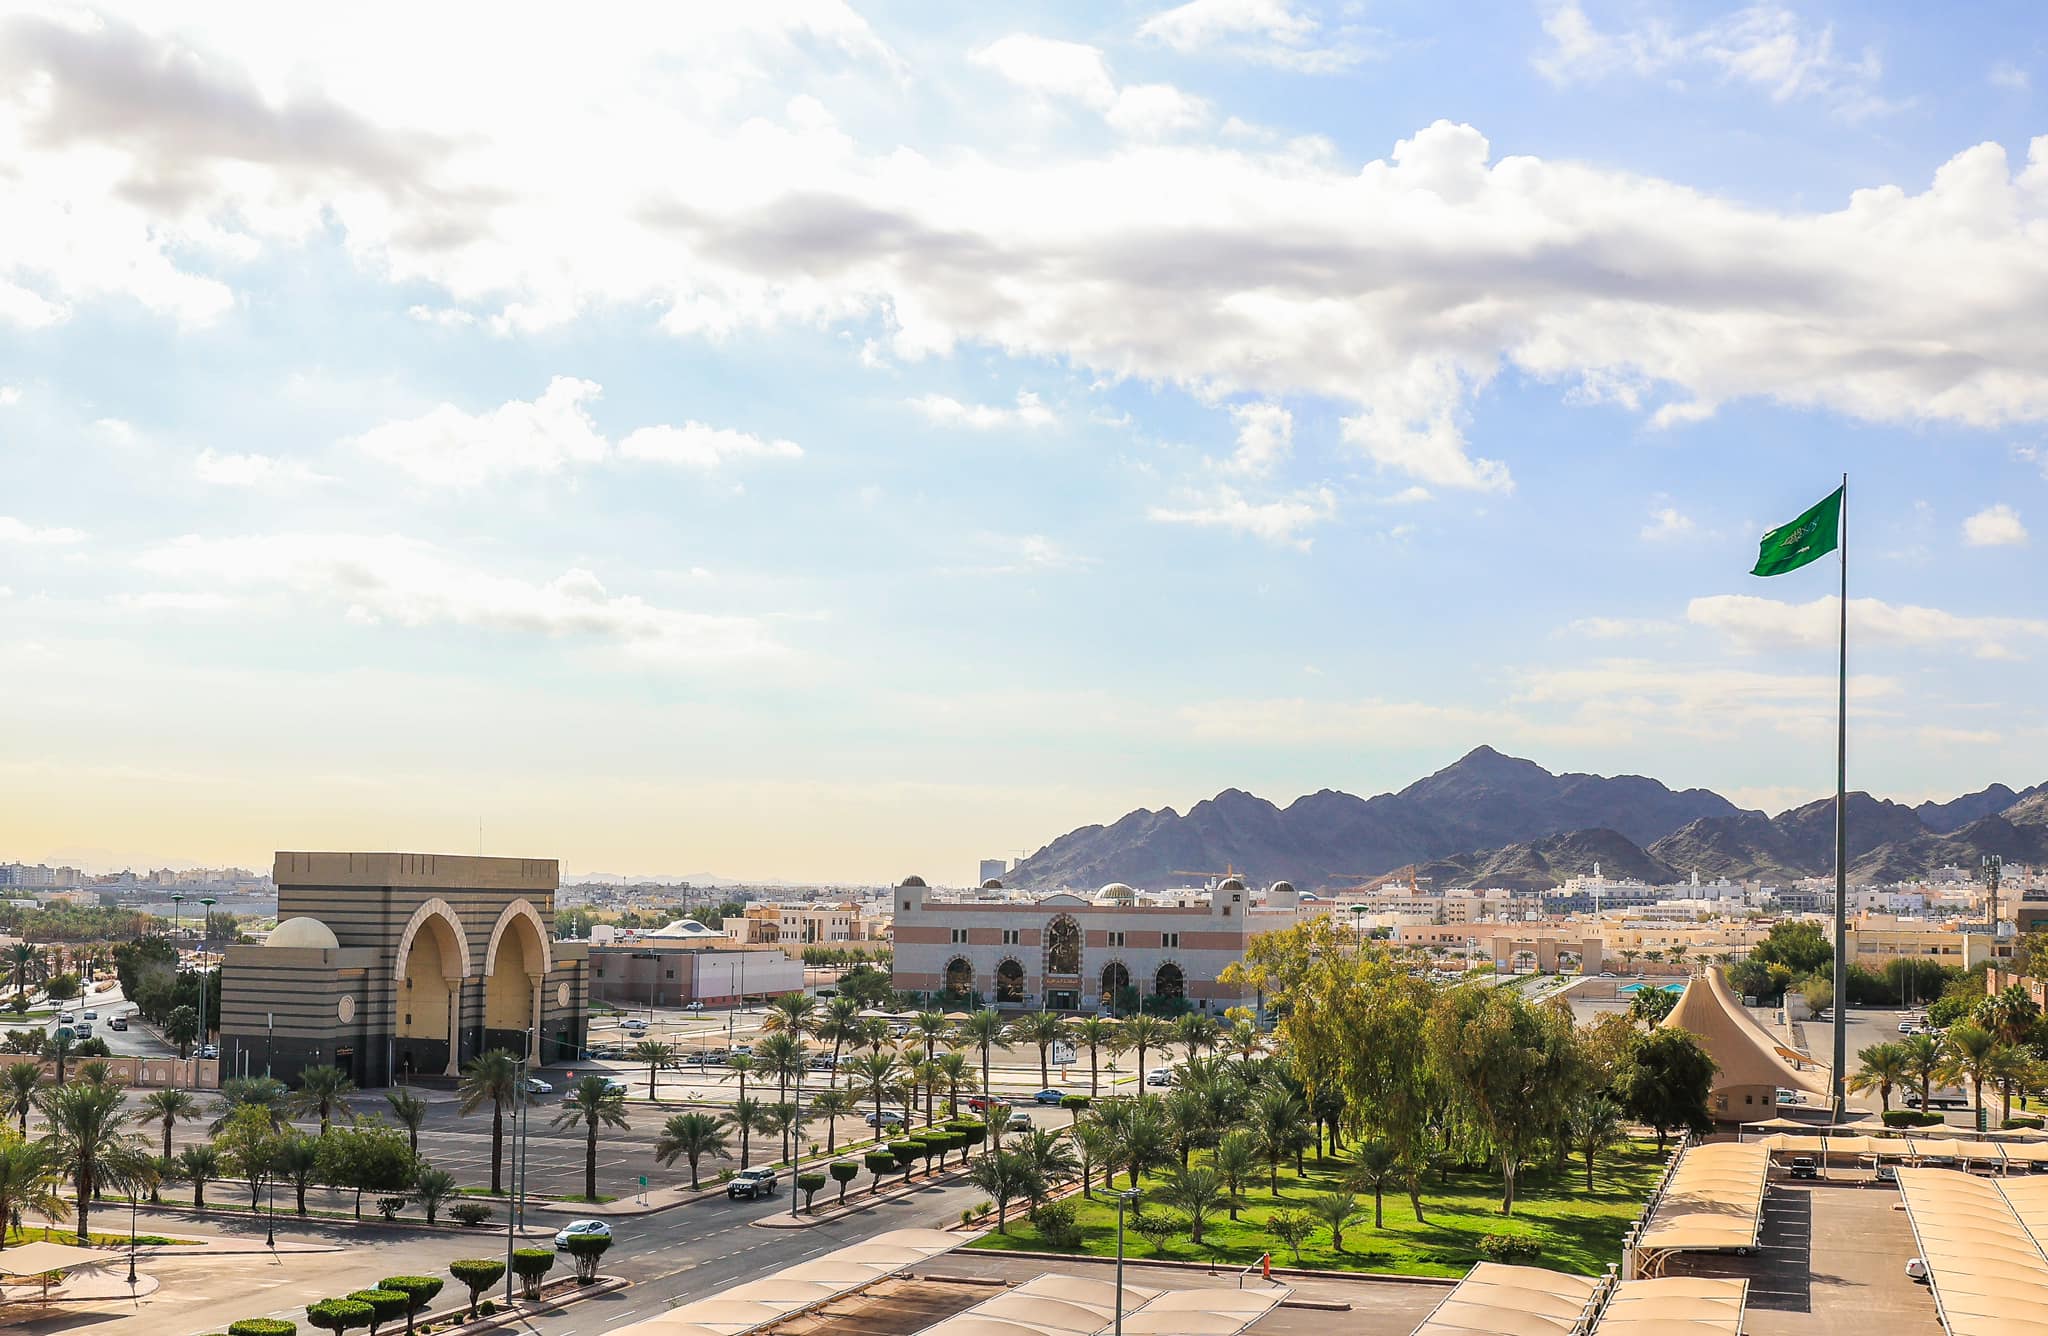 Islamic University of Madinah Rankings, Fees & Courses Details Top